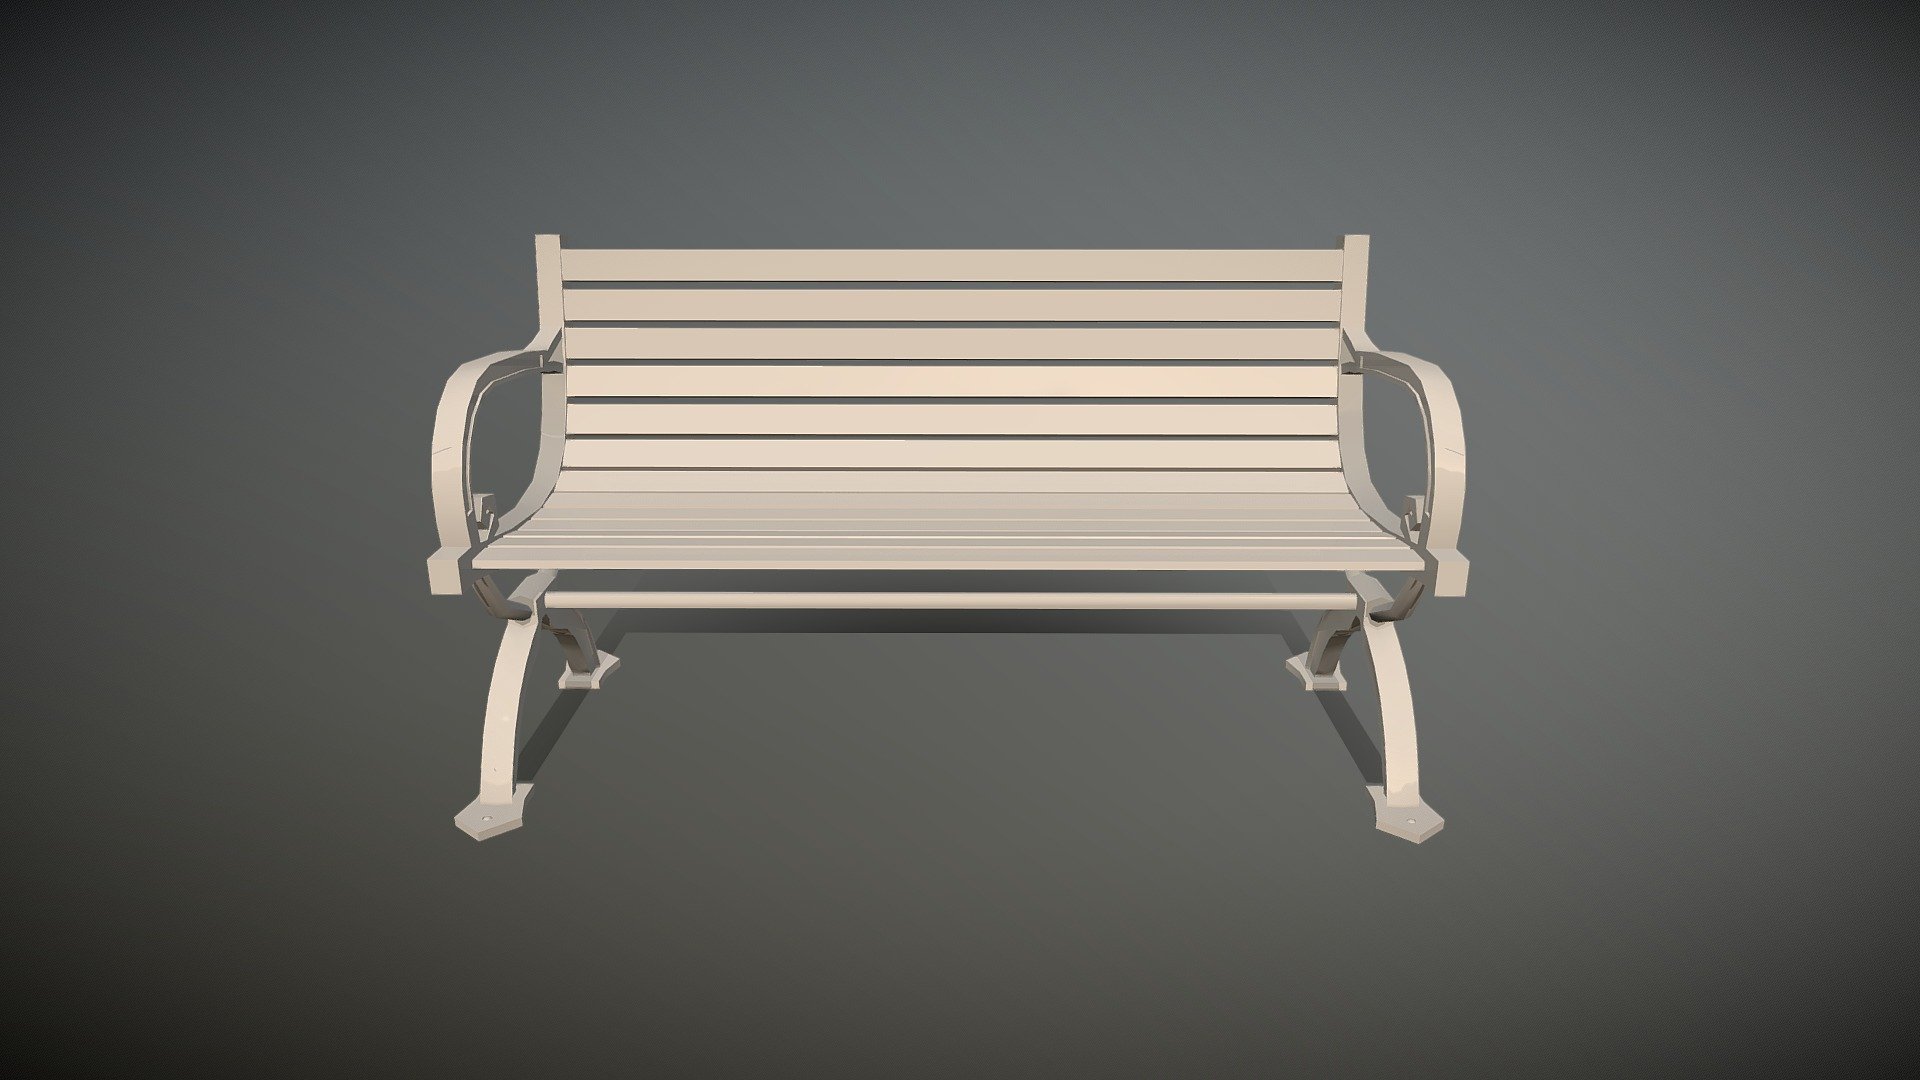 3d Bench

The model of 3d Wooden Bench is completely designed in Autodesk maya and Substance painter software is used for complete texturing of Model 3d model